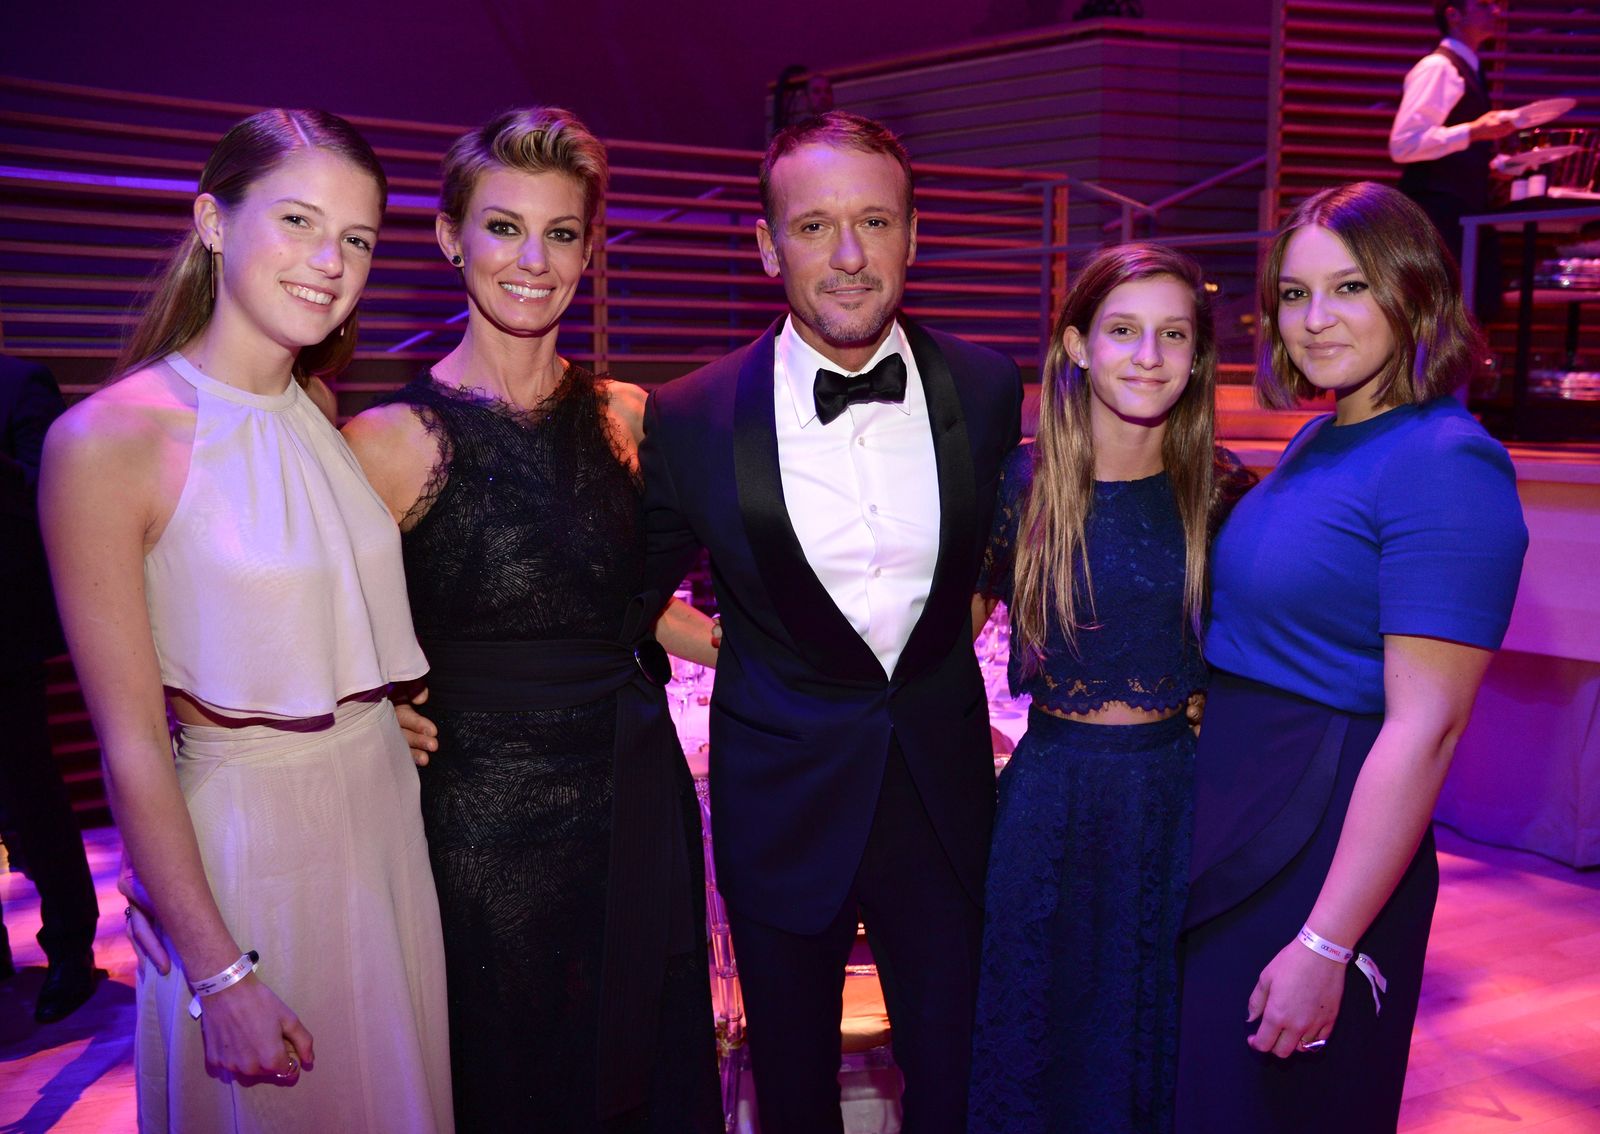 Gracie McGraw, Faith Hill, Tim McGraw, Audrey McGraw and Maggie McGraw attend TIME 100 Gala on April 21, 2015 | Photo: Getty Images